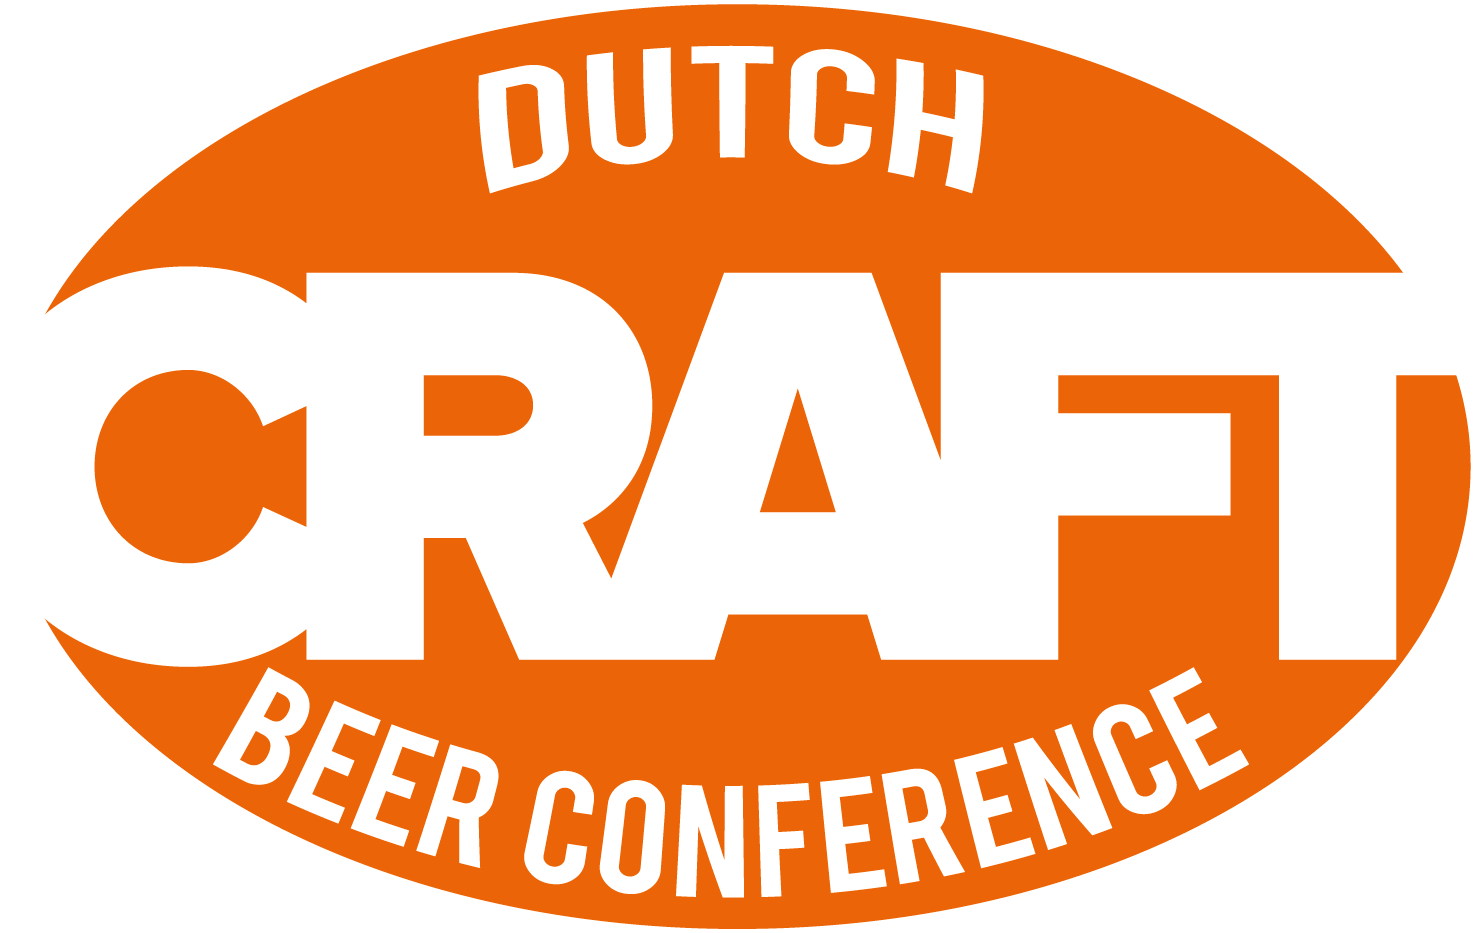 Dutch craft beer conference